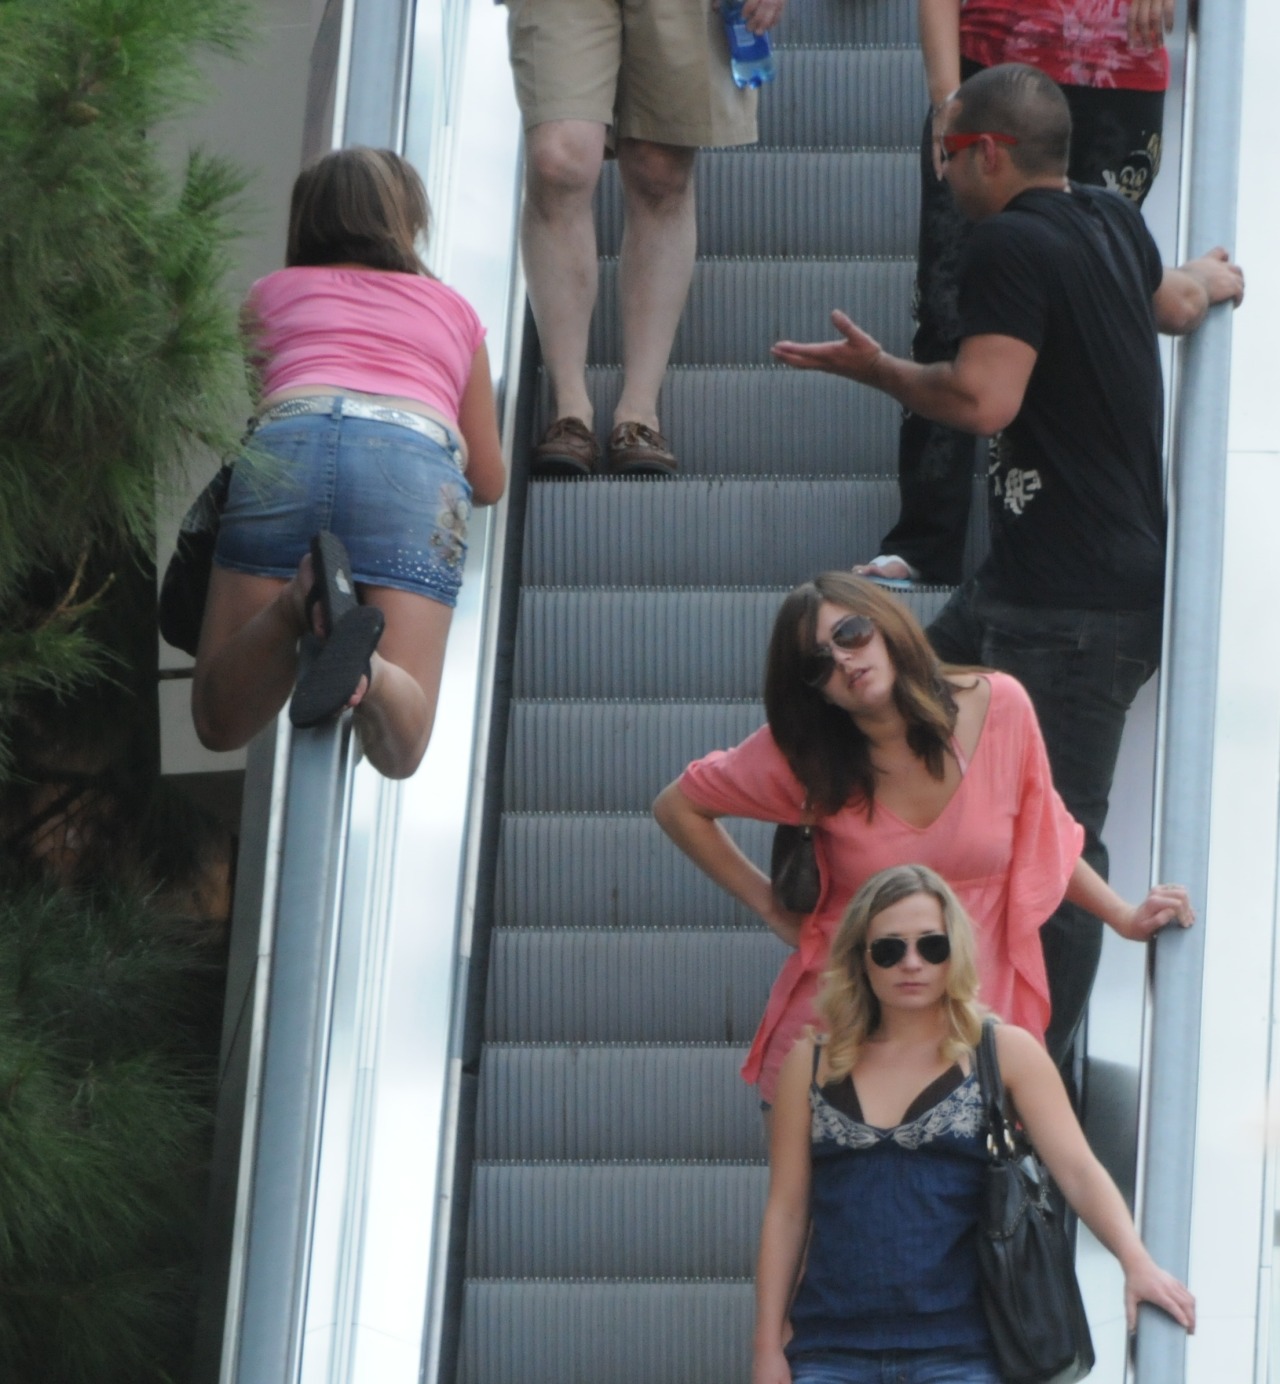 Girls slide down handrails everywhere. It’s just that here in Vegas they do it